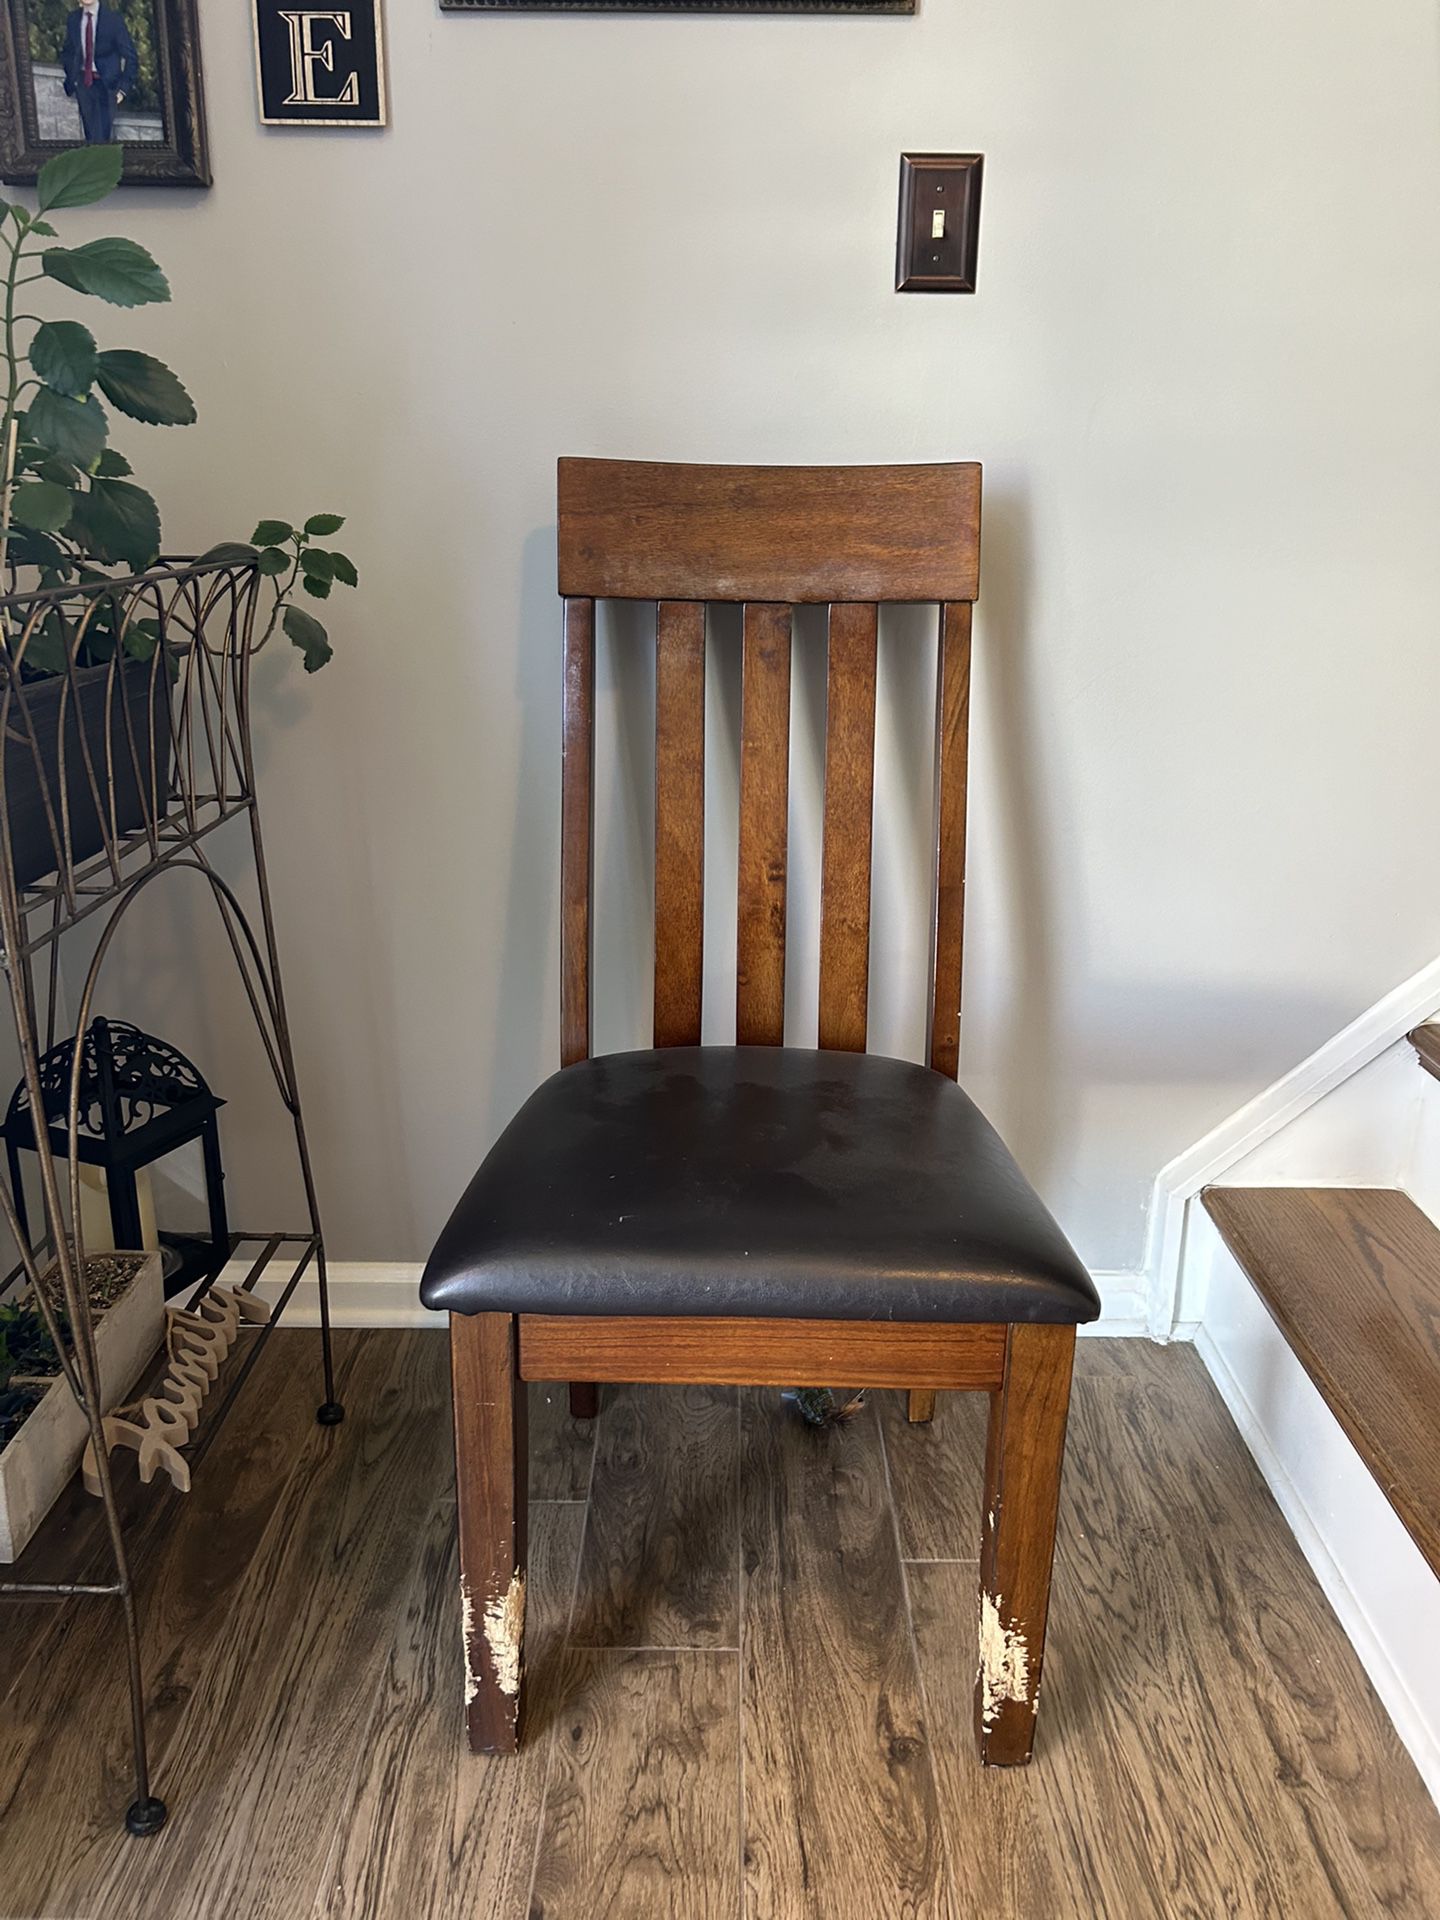 Leather/ wooden chairs- set of 6